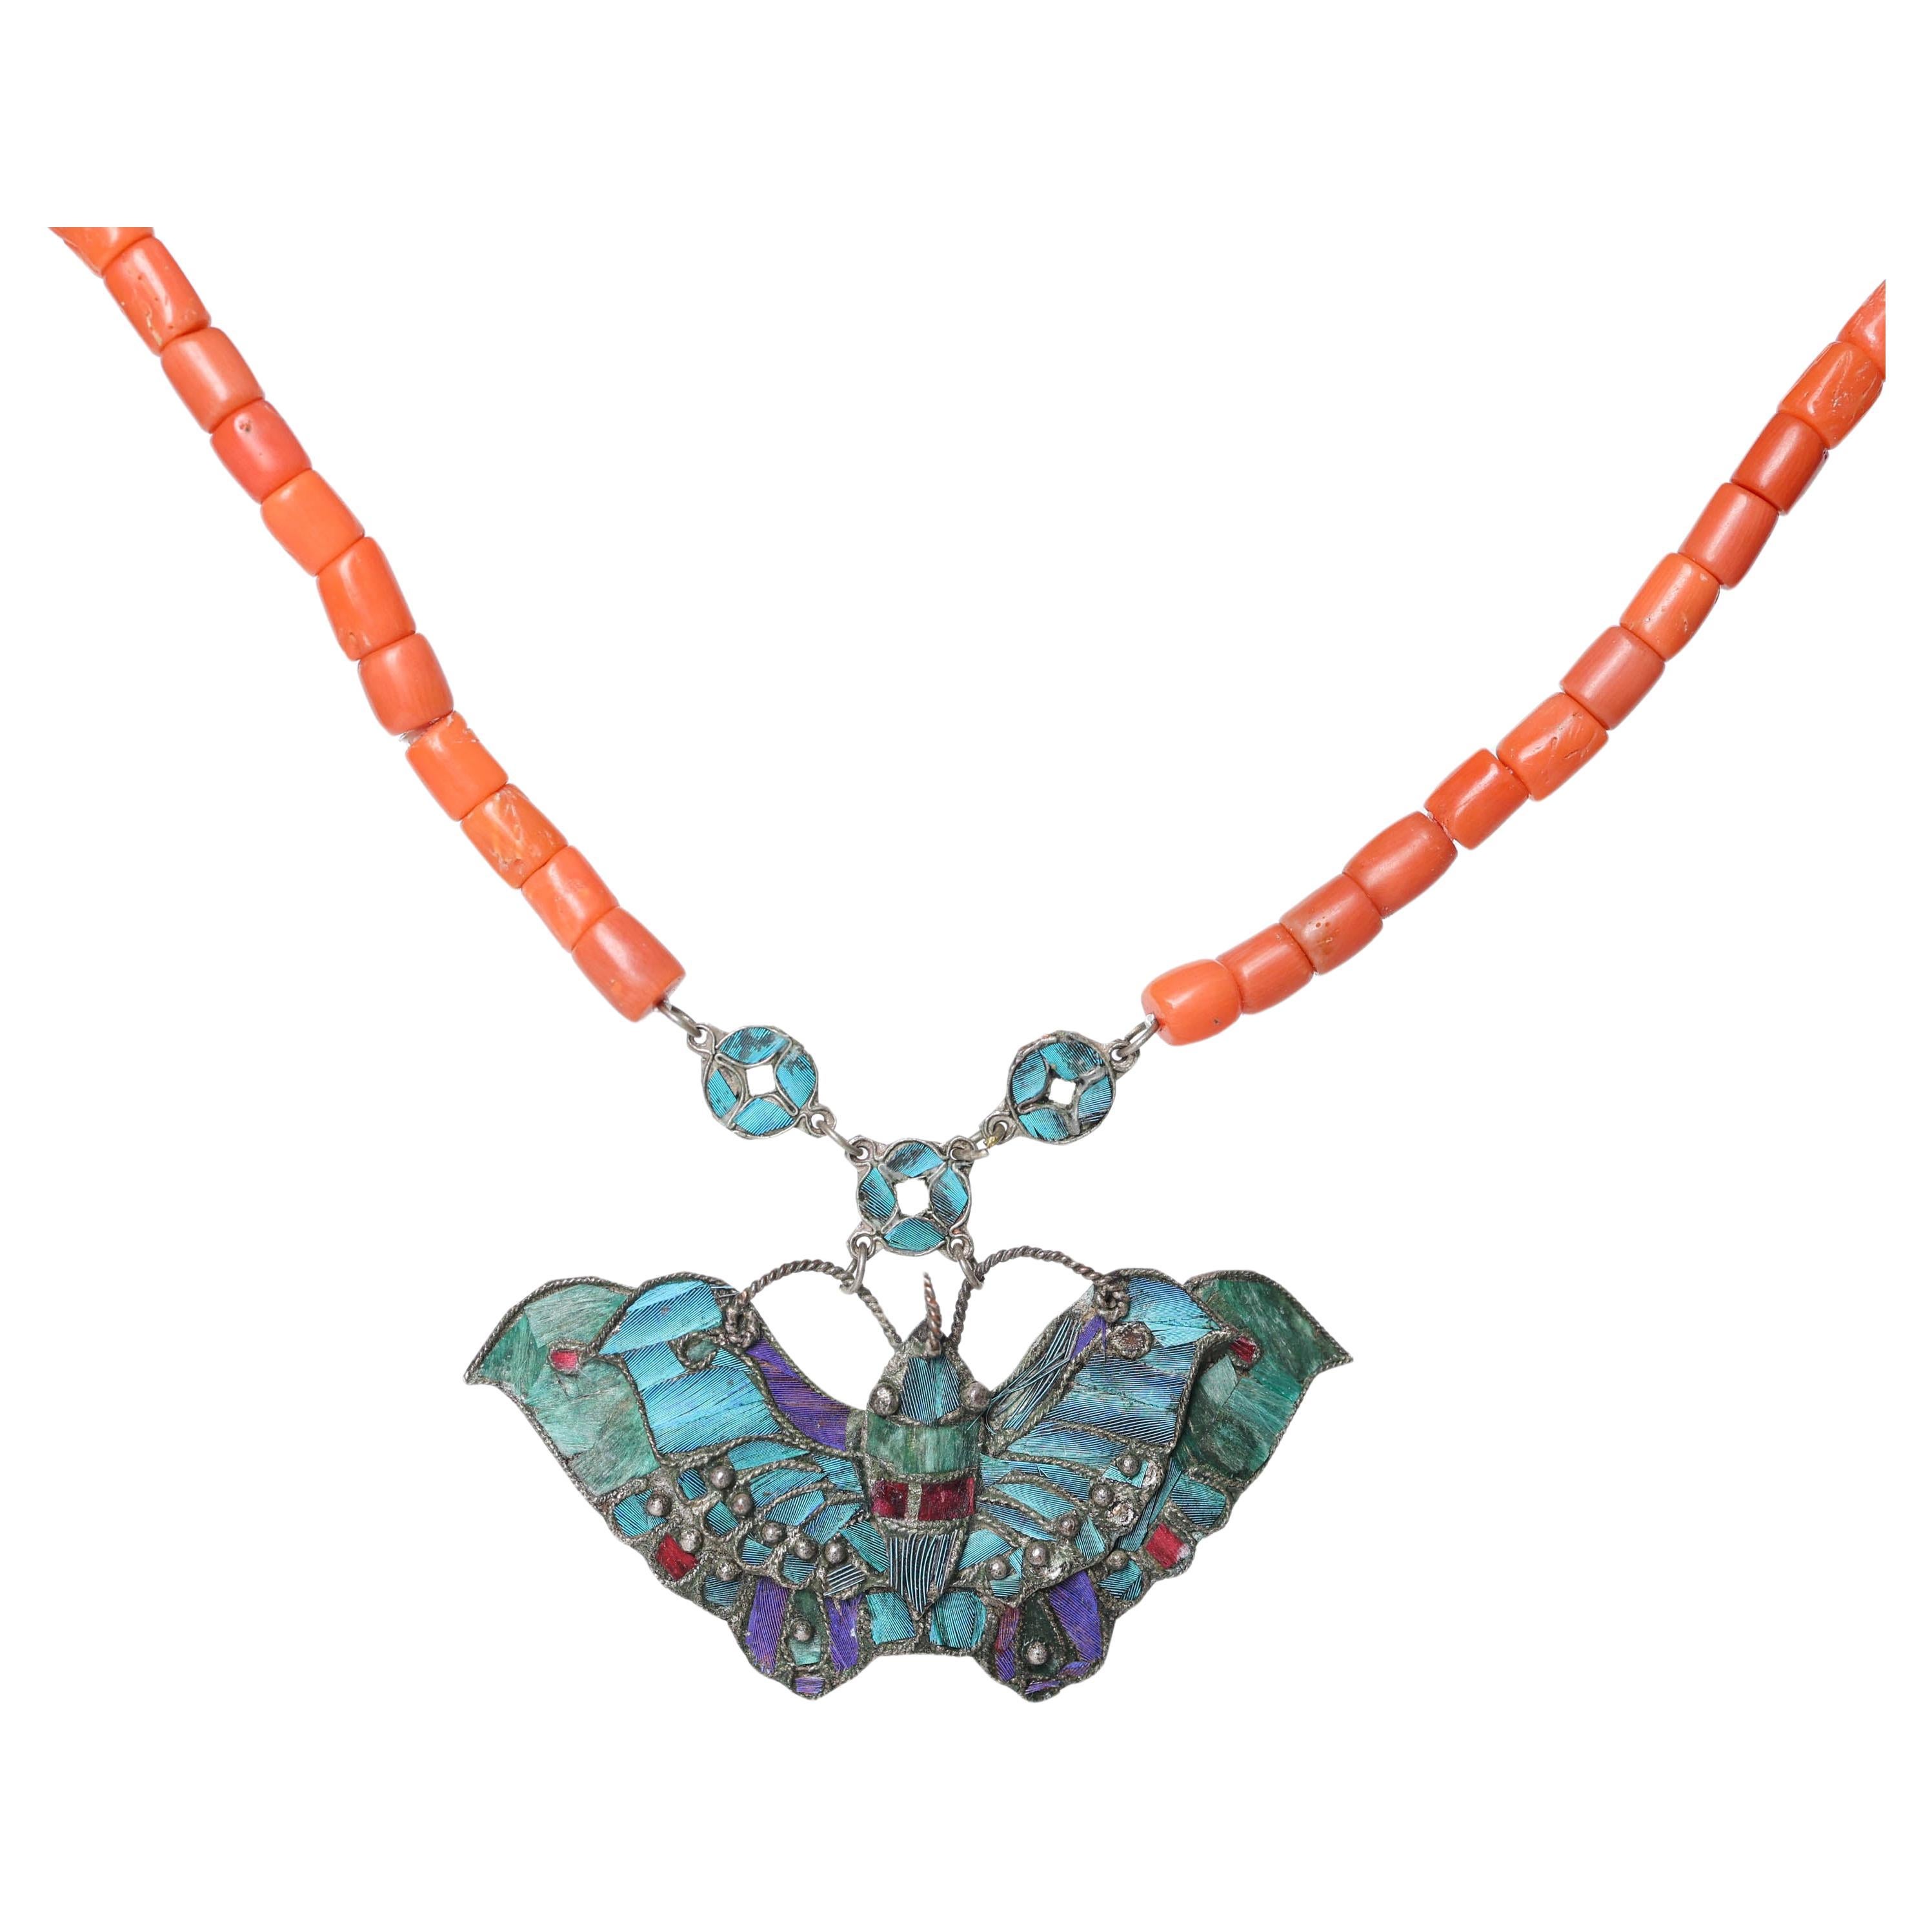 Chinese Antique Art Nouveau Coral and Kingfisher Tian-Tsui Necklace For Sale